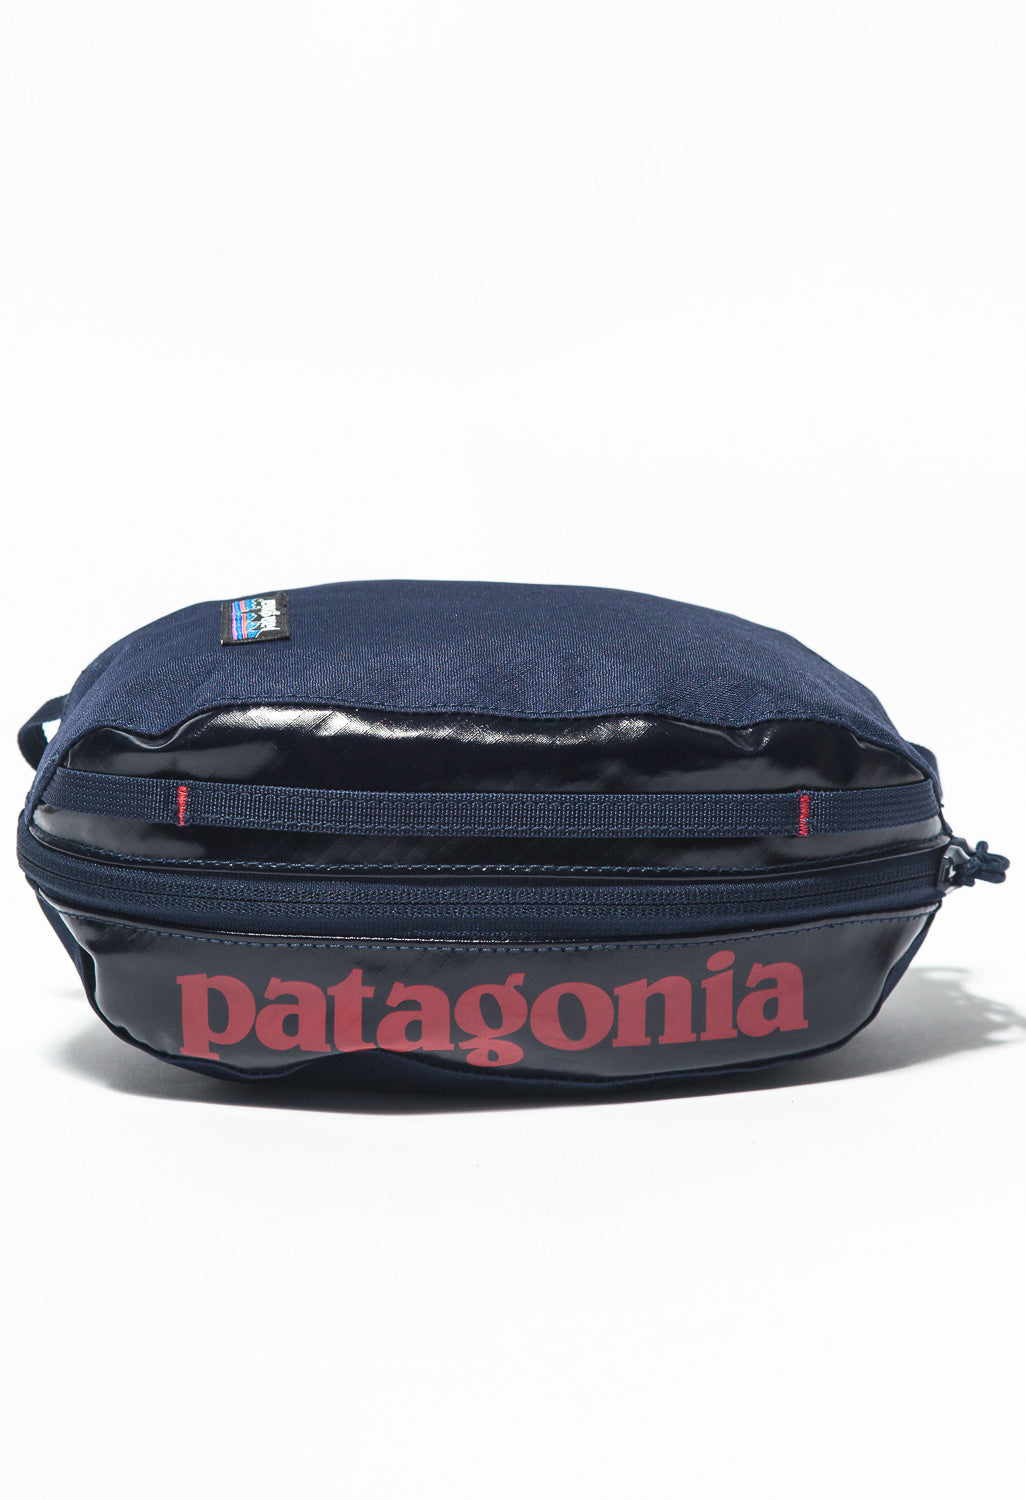 Patagonia Black Hole Cube - Small - Classic Navy